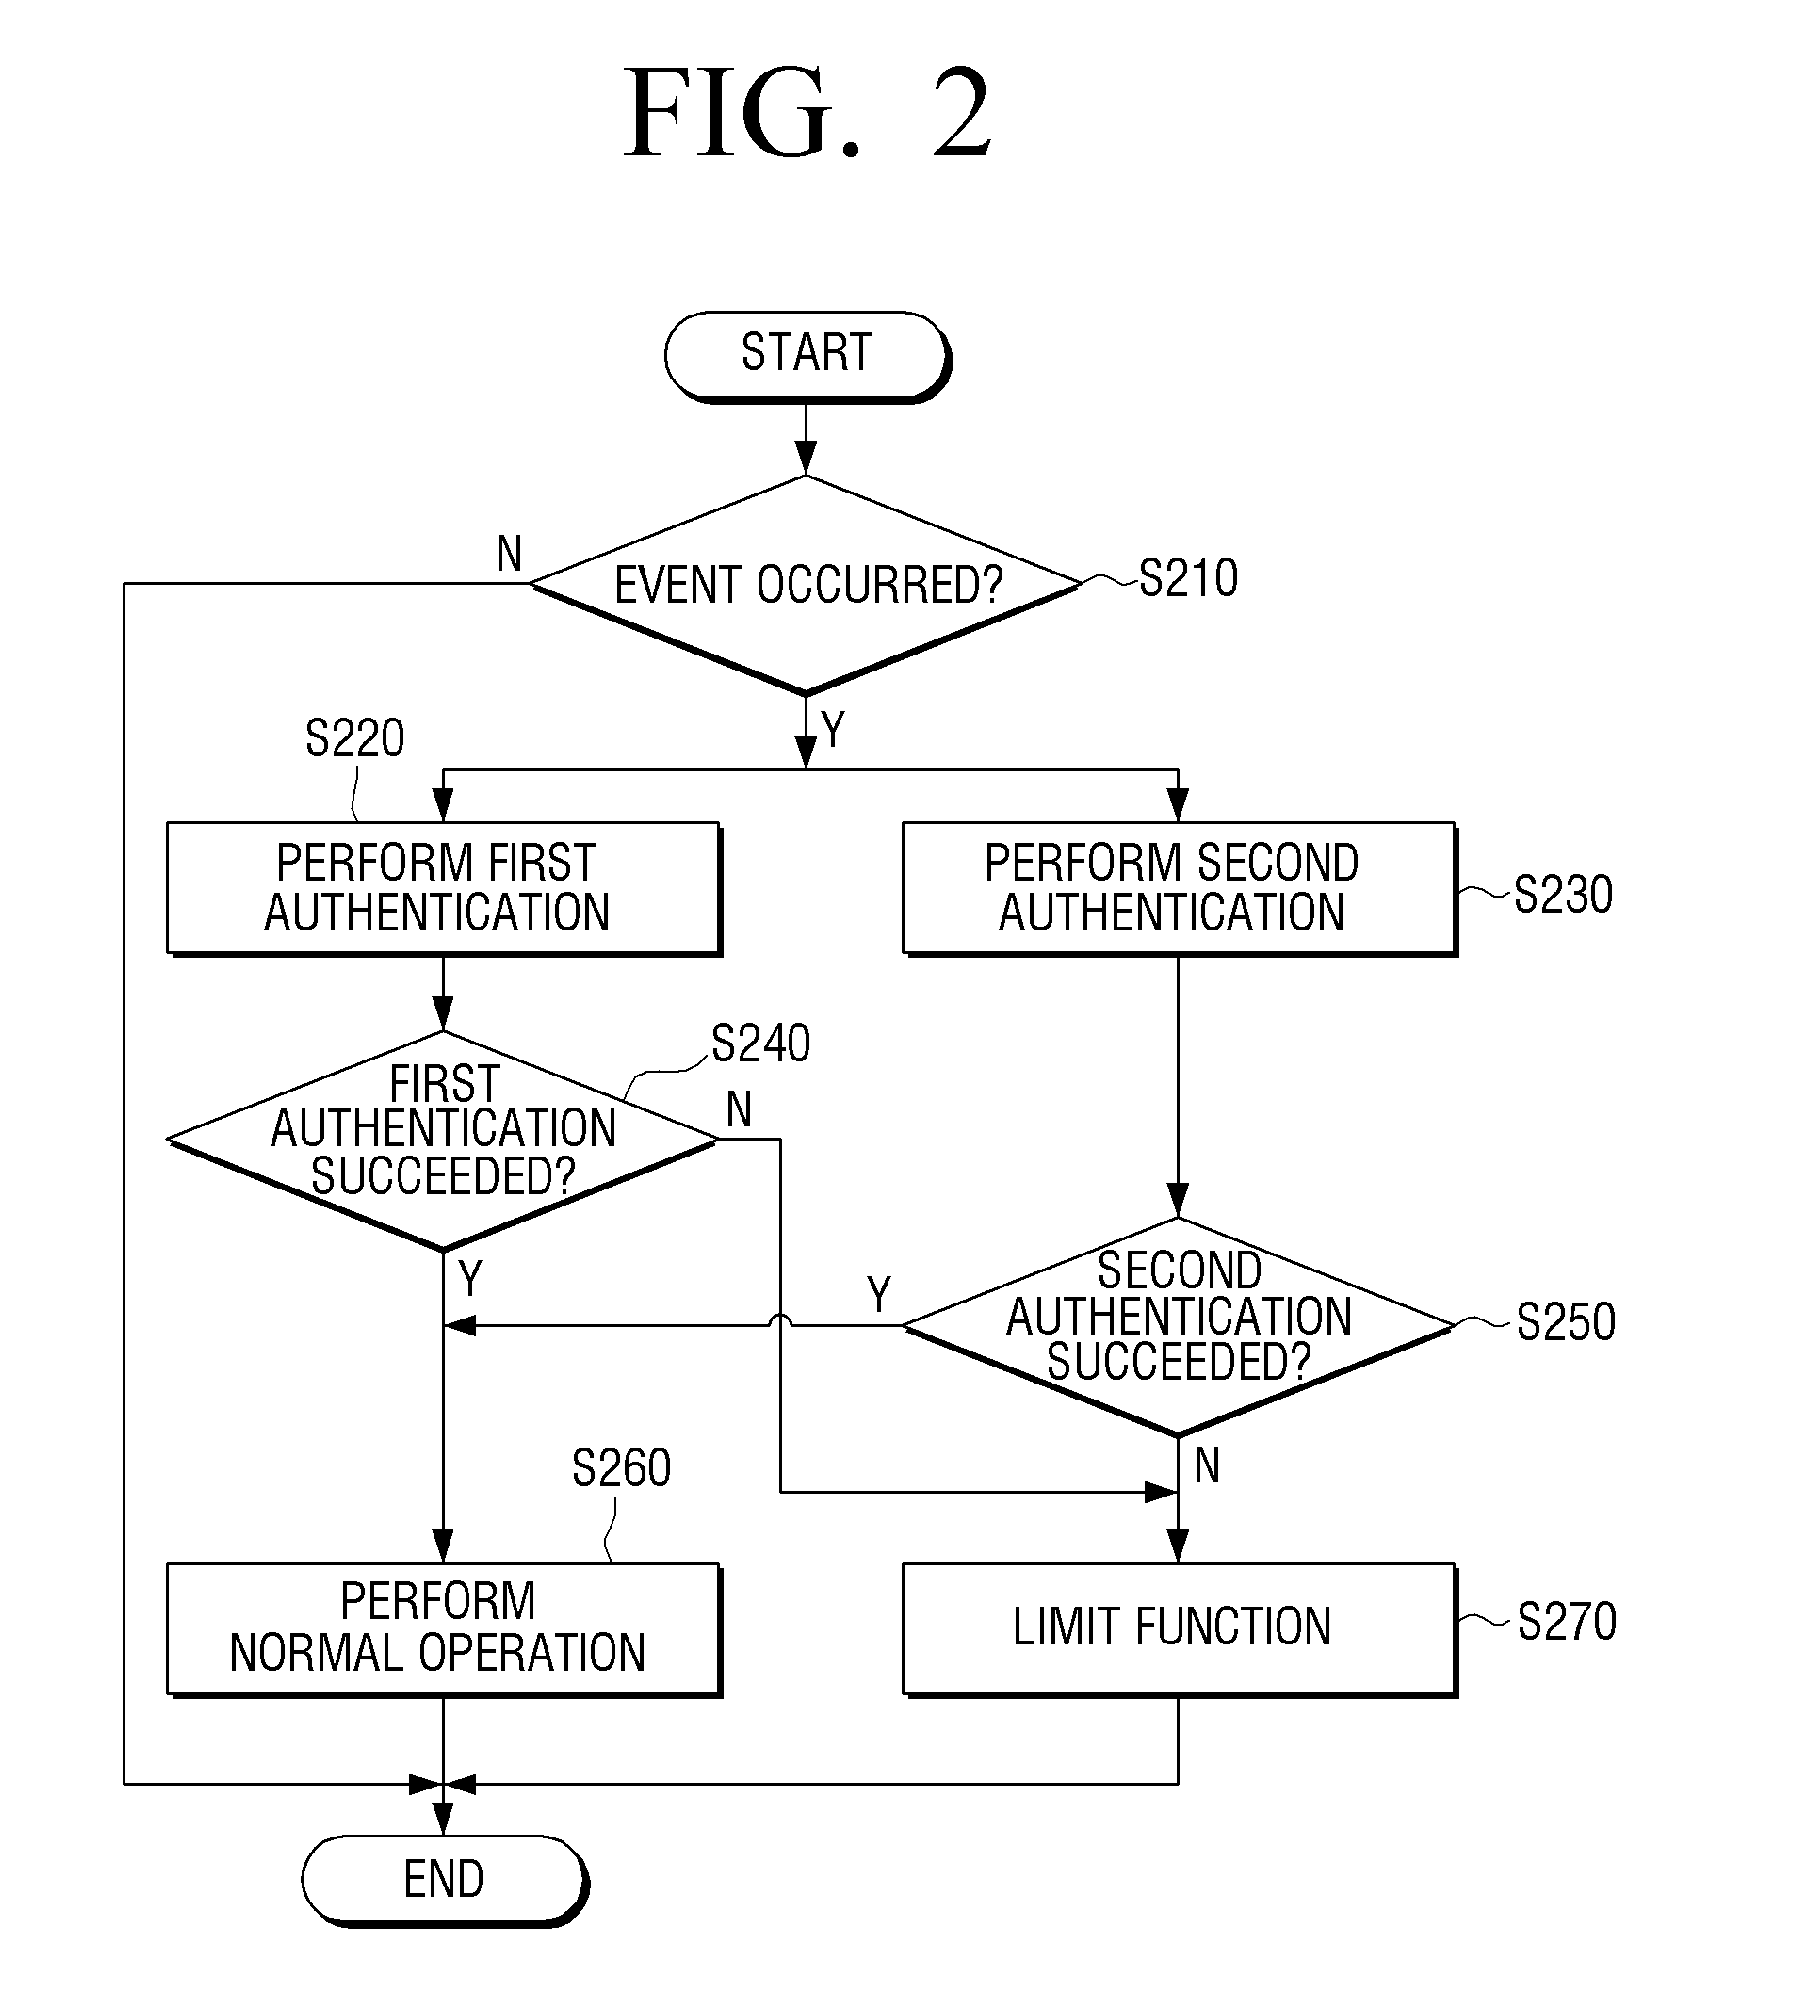 Crum chip mountable in comsumable unit, image forming apparatus for authentificating the crum chip, and method thereof